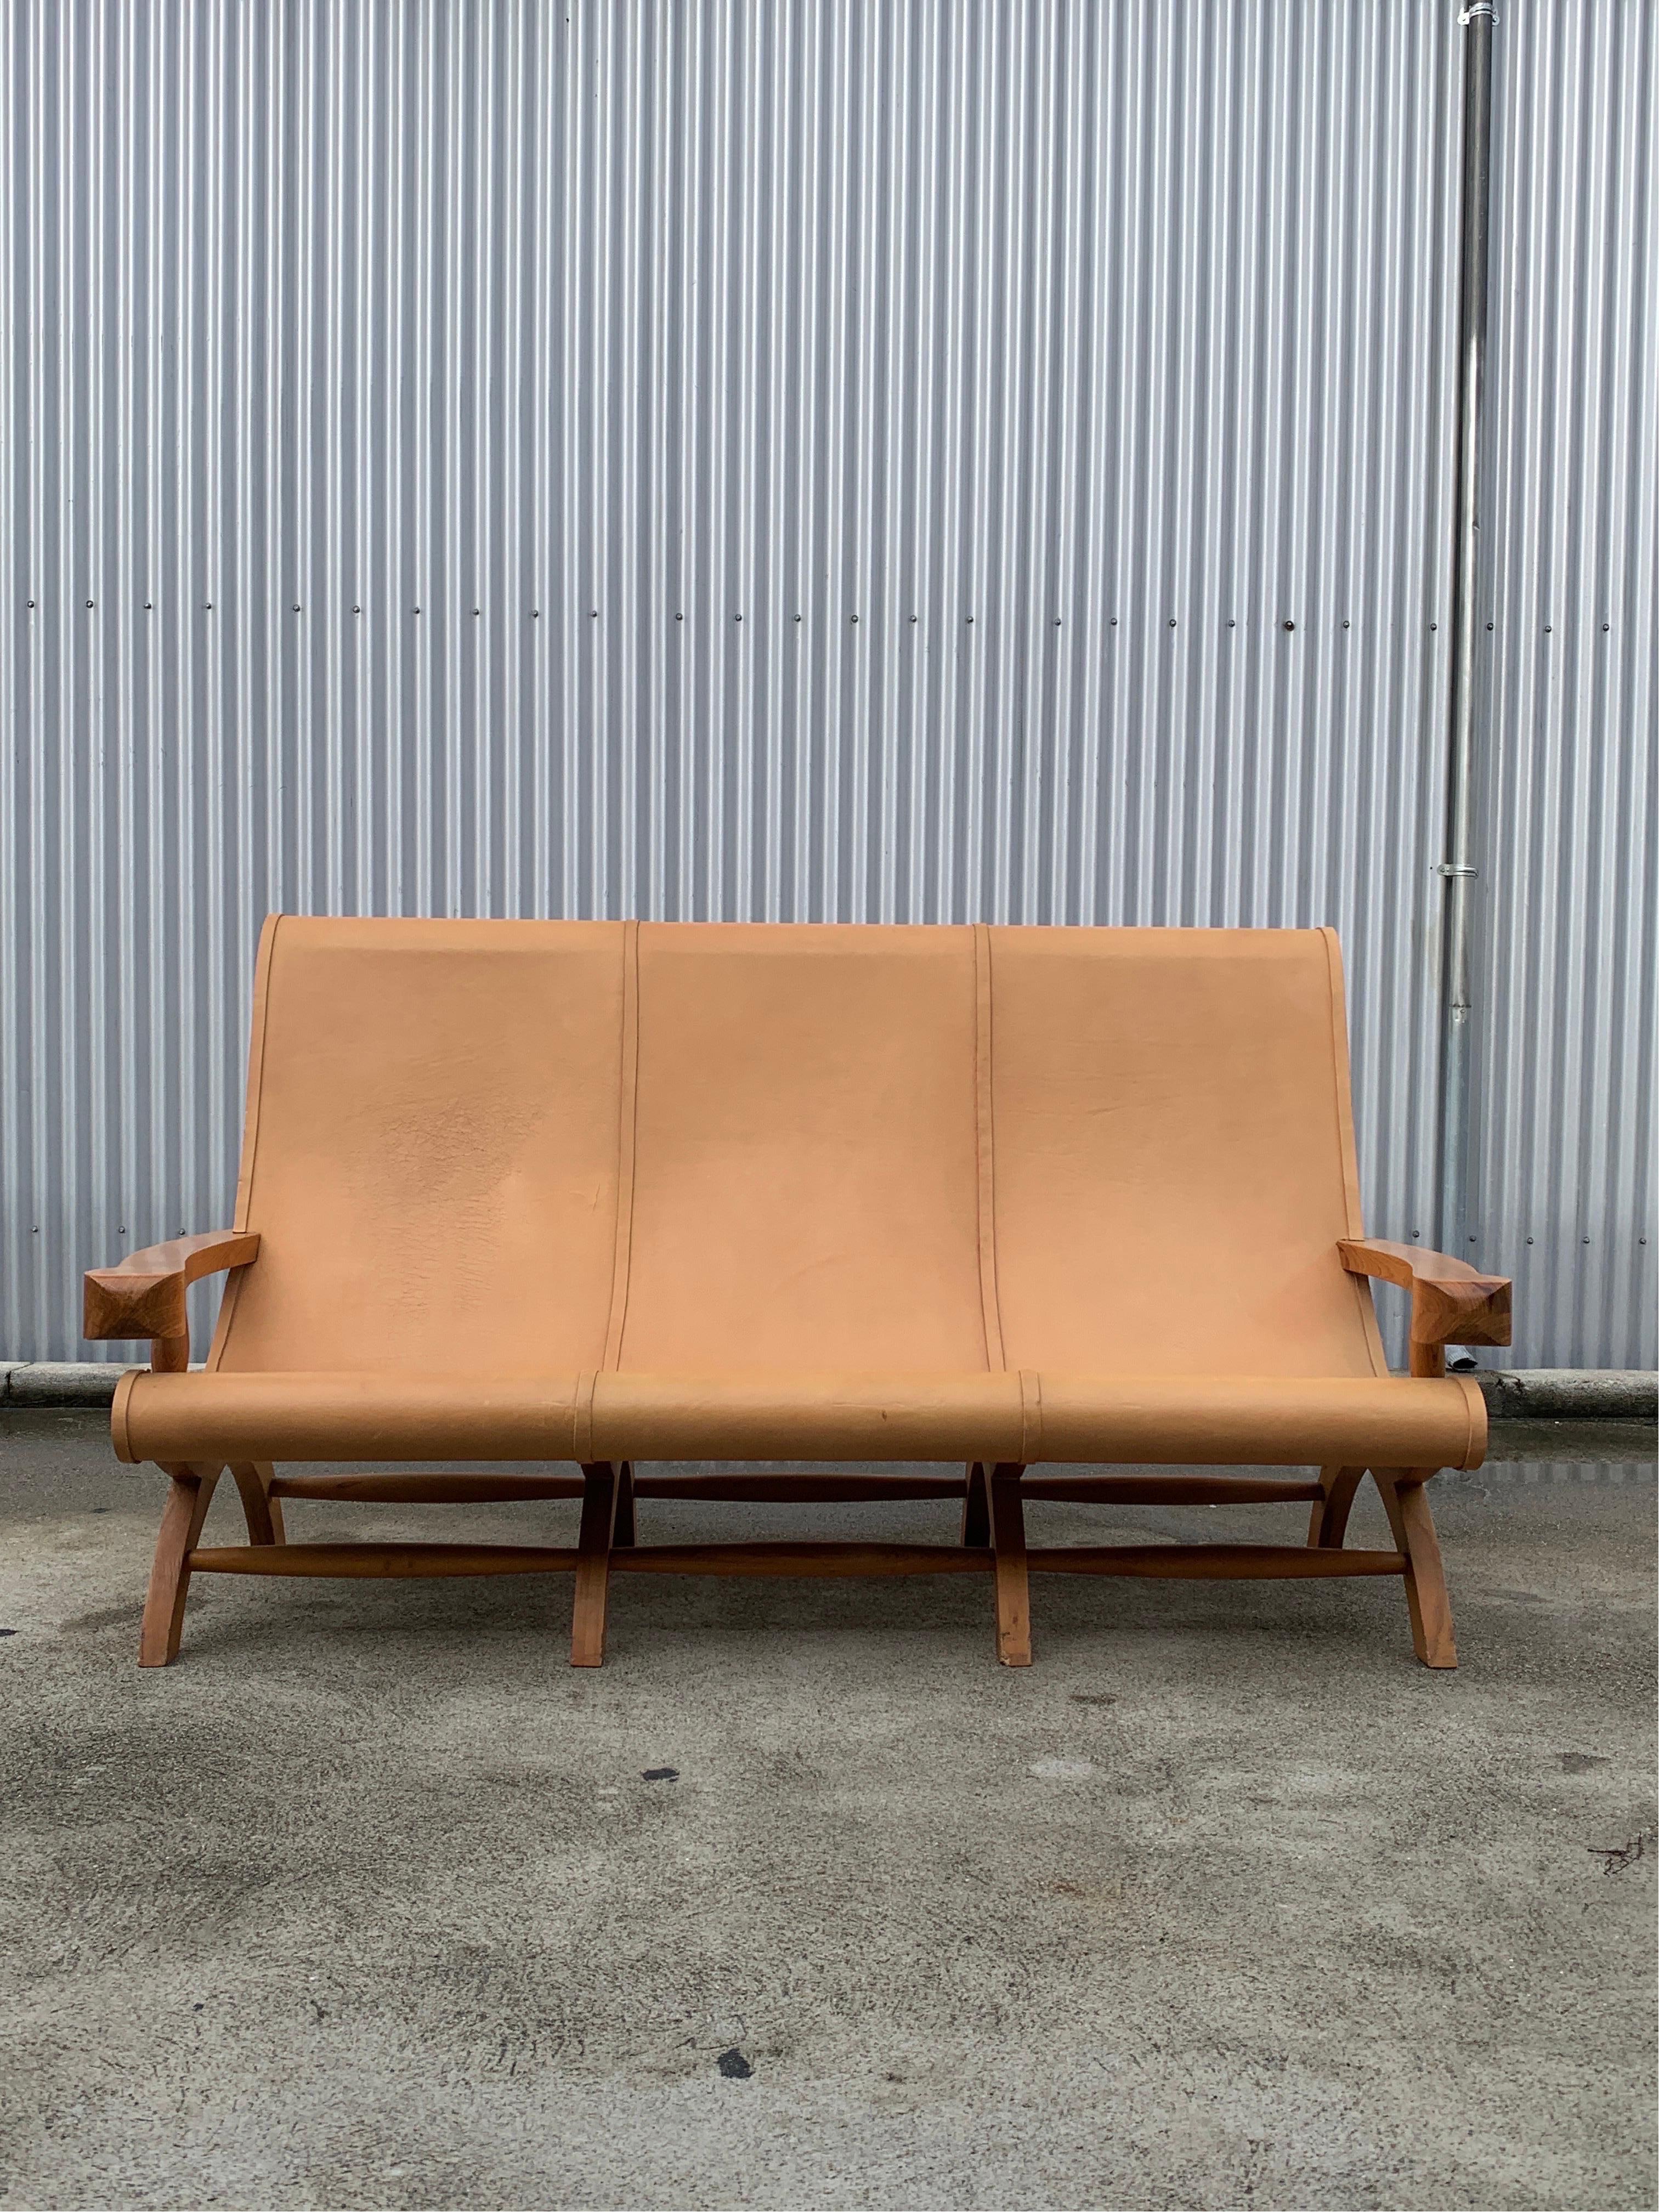 Clara Porset Butaque sofa from an important architectural masterpiece designed by Ricardo Legarreta in Emeryville California. Part of a reception suite featured prominently in the lobby of the Chiron building completed in 1999. Sofa is an iconic